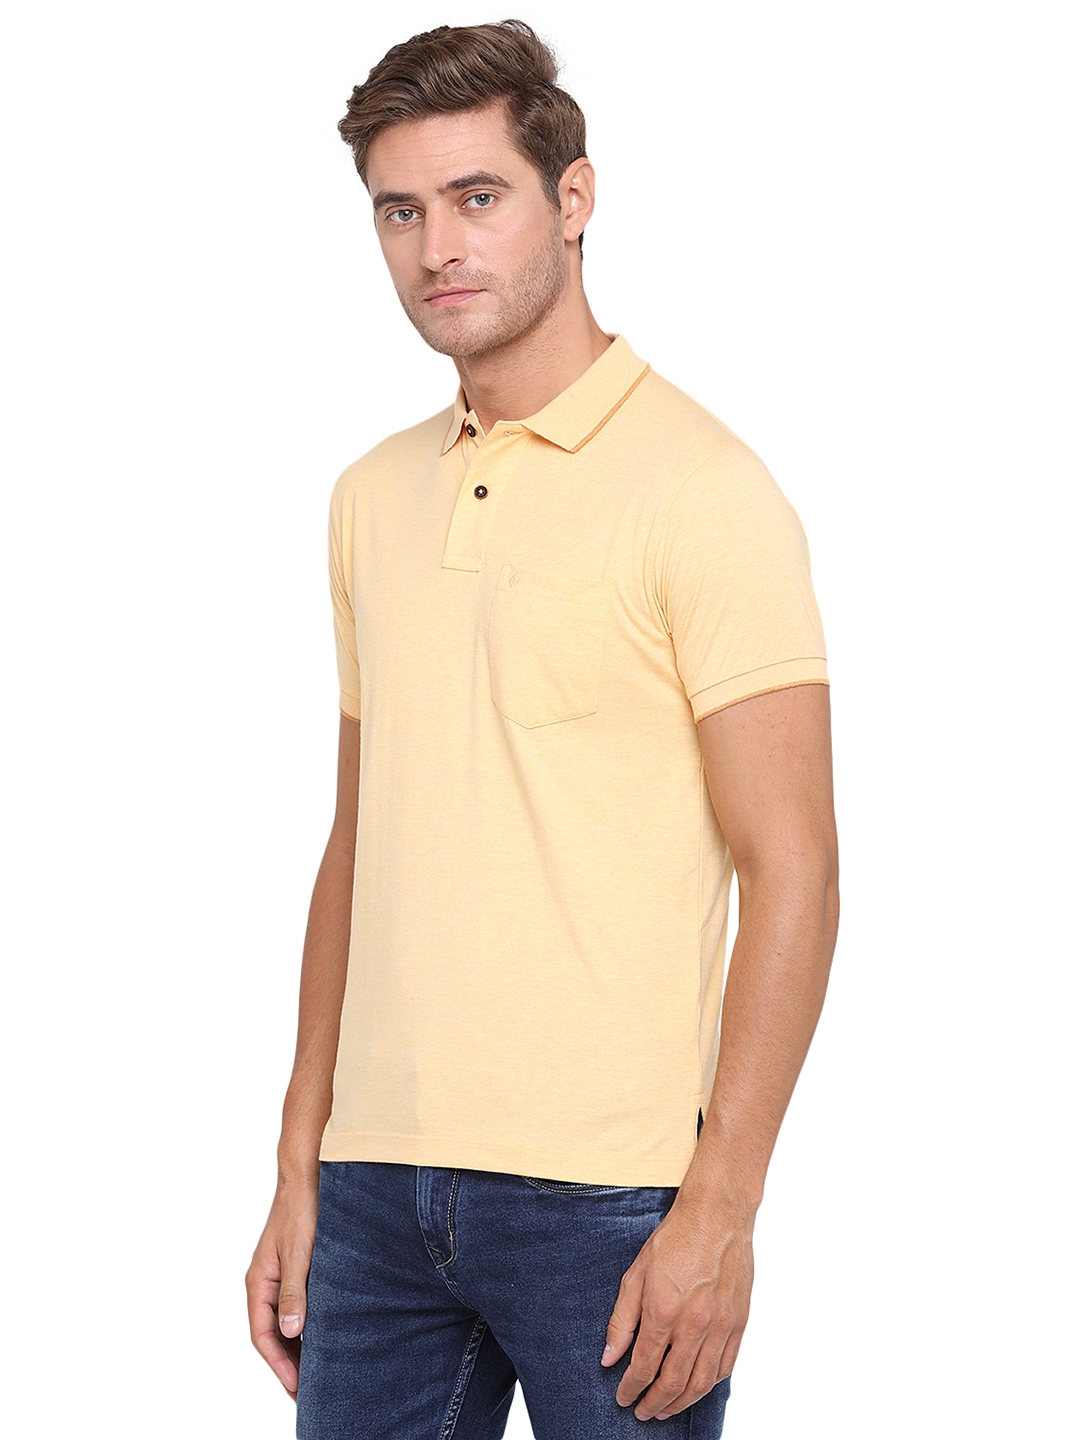 Greenfibre | Light Yellow Solid Slim Fit Polo T-Shirt | Greenfibre 1